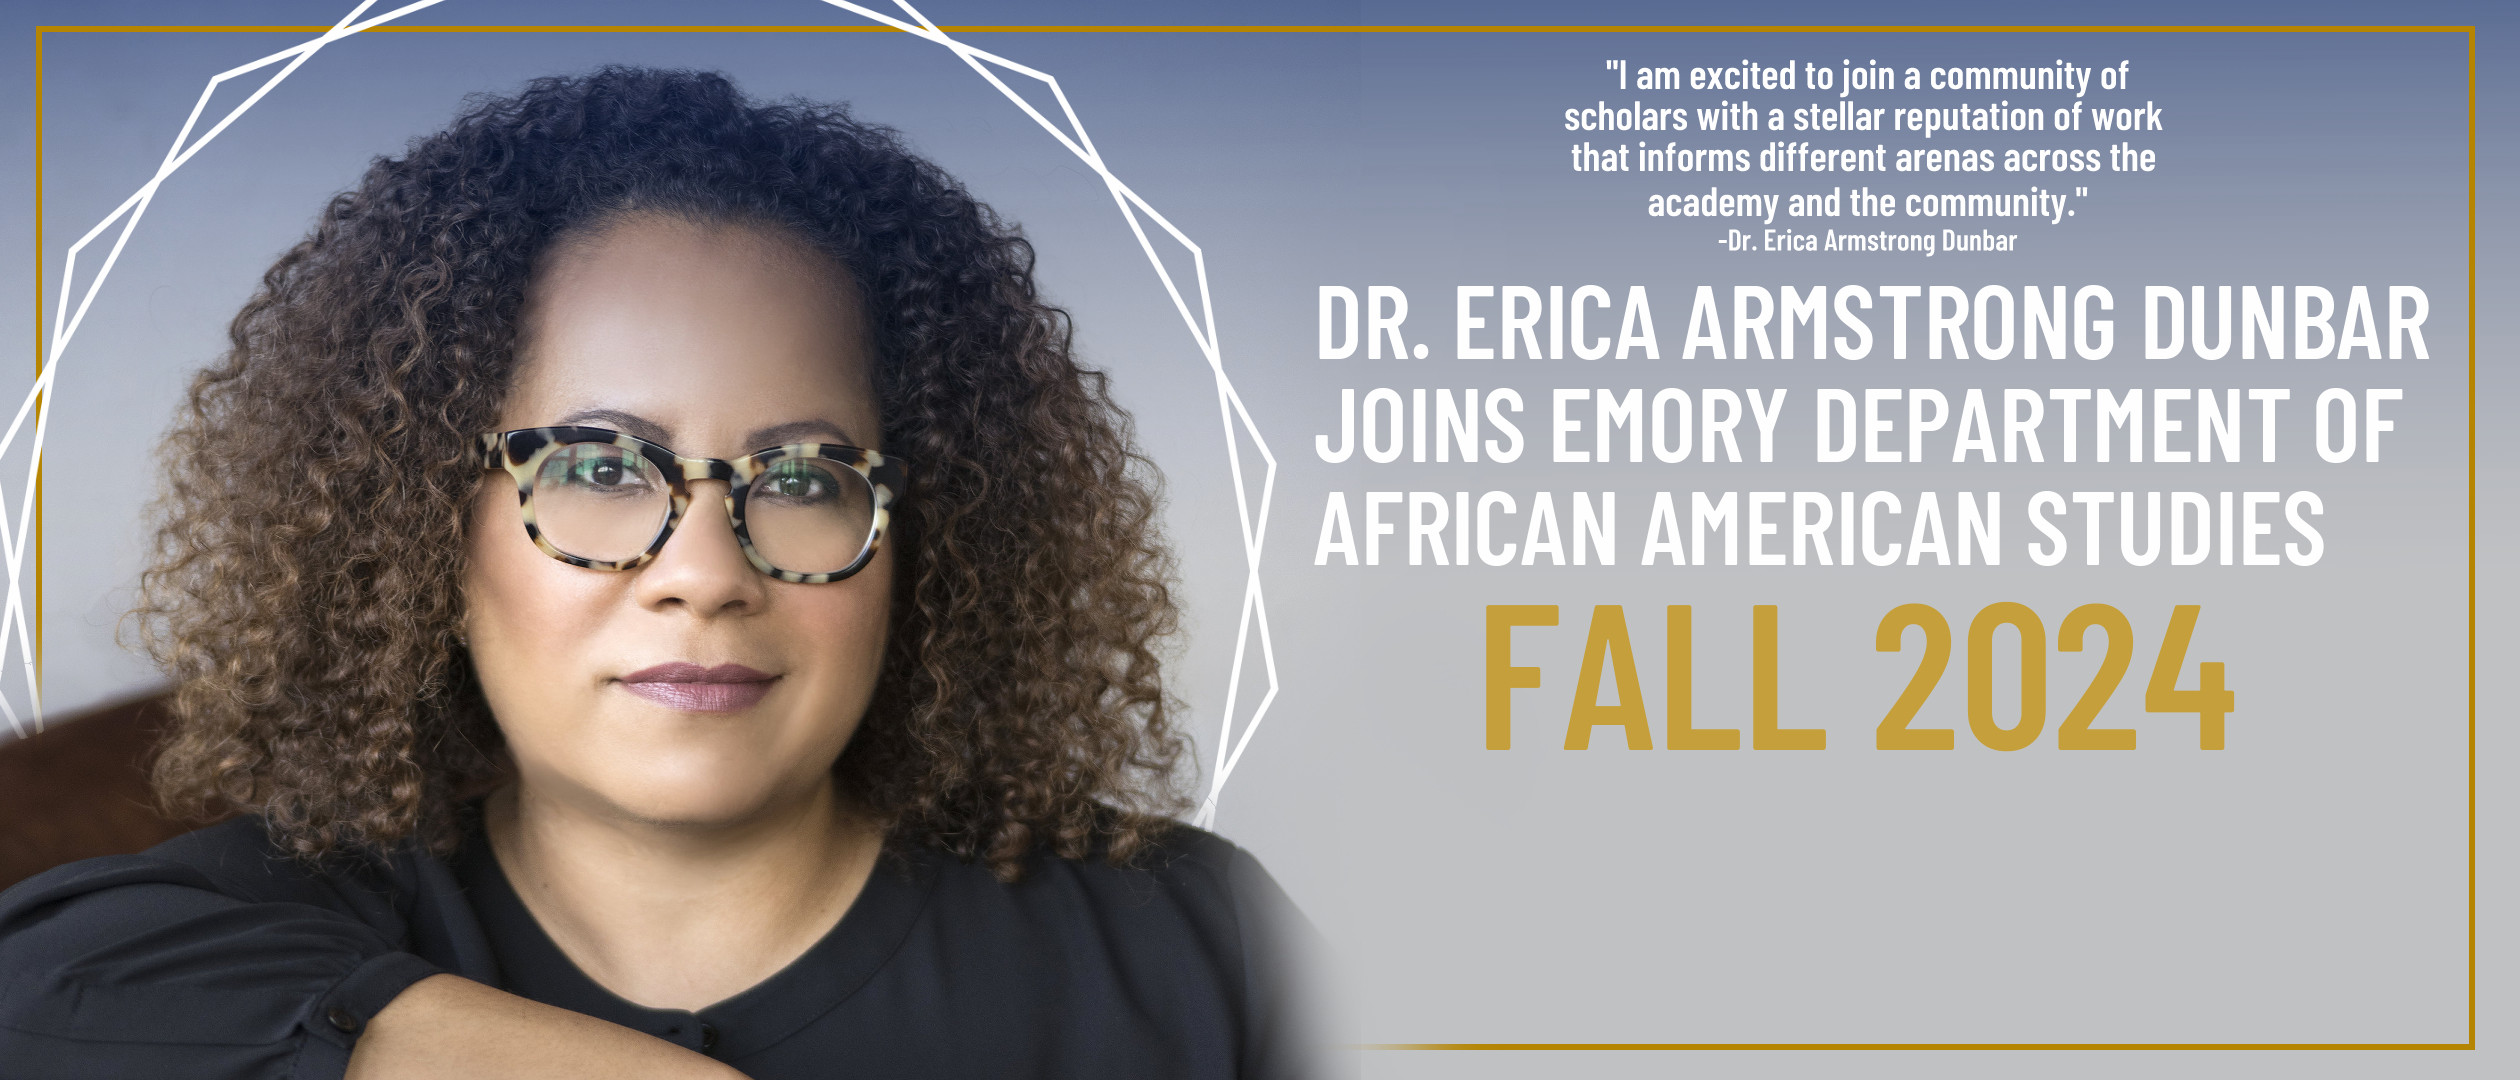 Dr. Erica Armstrong Dunbar joins Emory Department of African American Studies Fall 2024